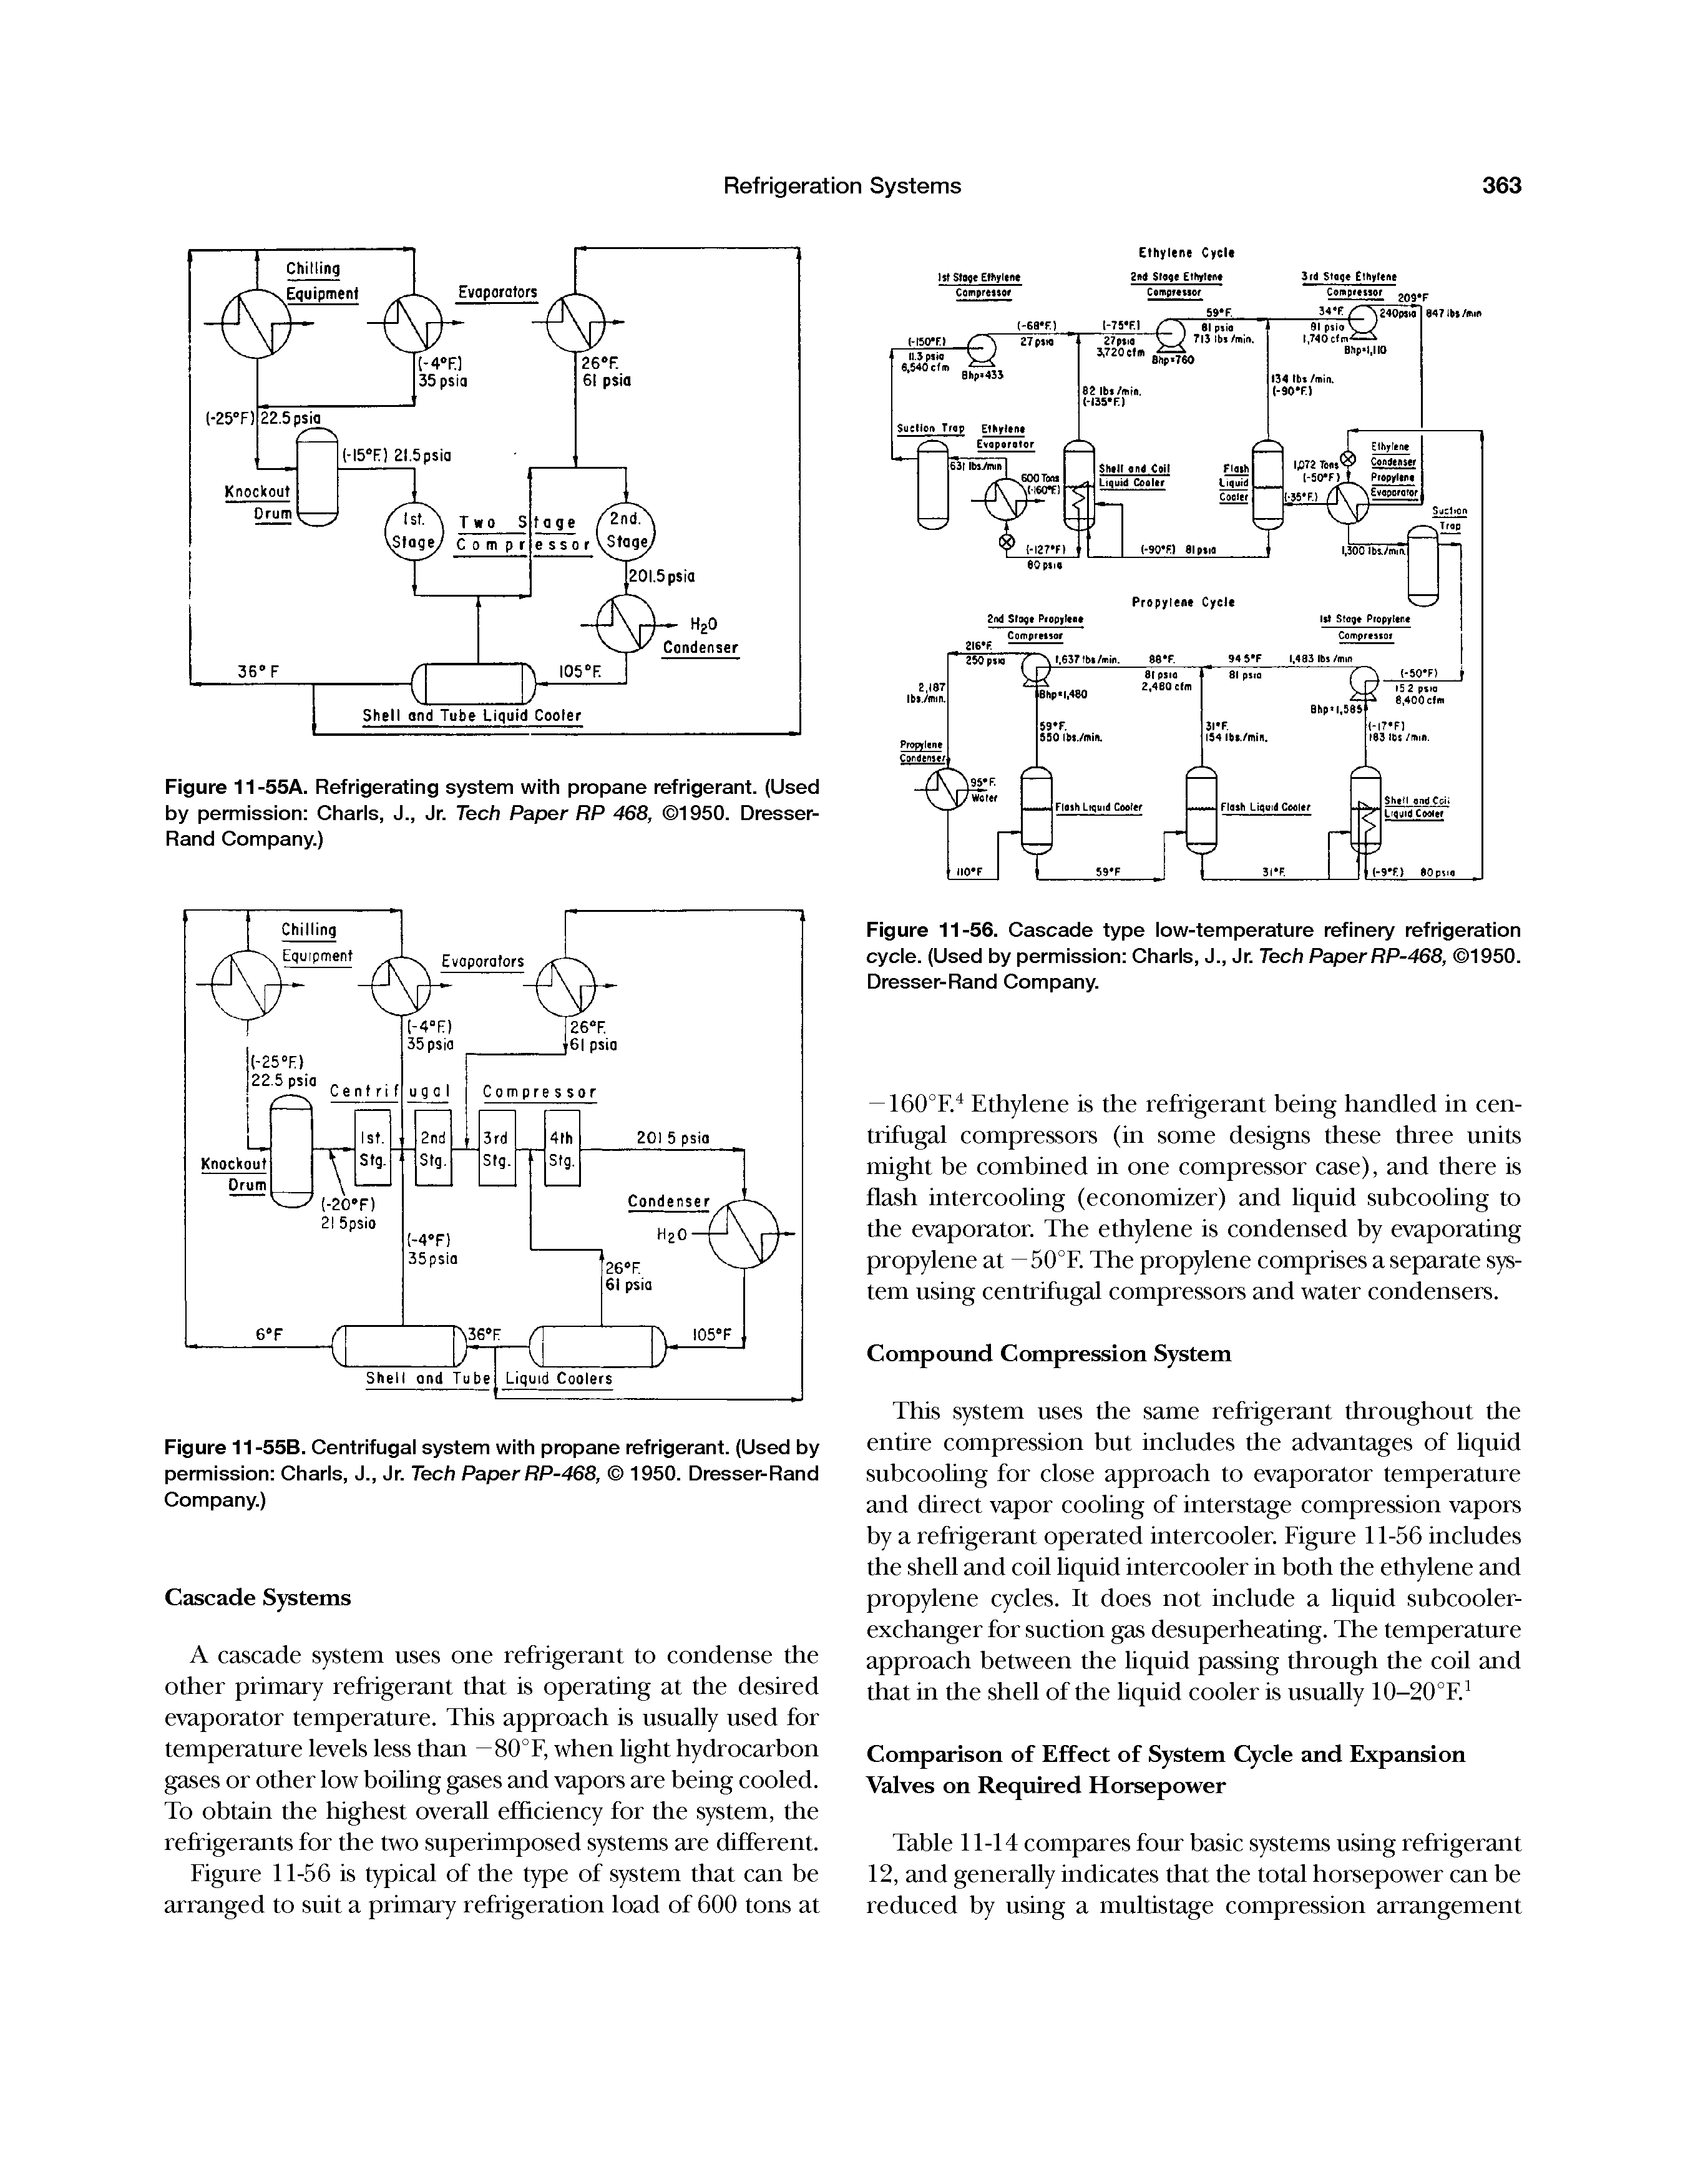 Figure 11-55B. Centrifugal system with propane refrigerant. (Used by permission Chads, J., Jr. Tech Paper RP-468, 1950. Dresser-Rand Company.)...